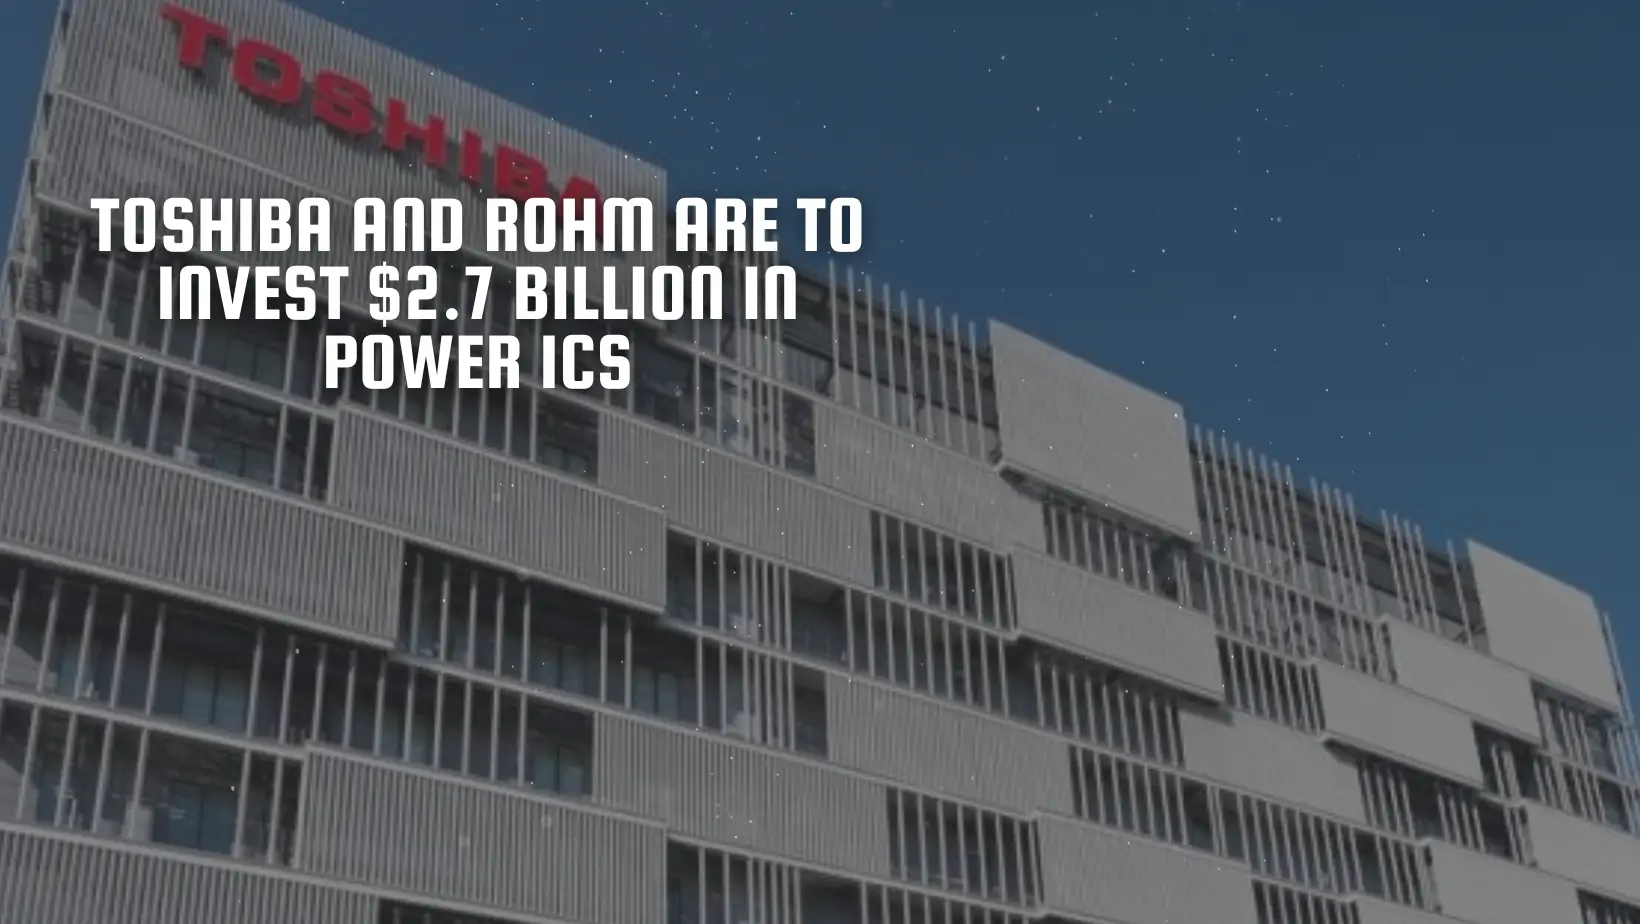 Toshiba and Rohm are to invest $2.7 billion in power ICs